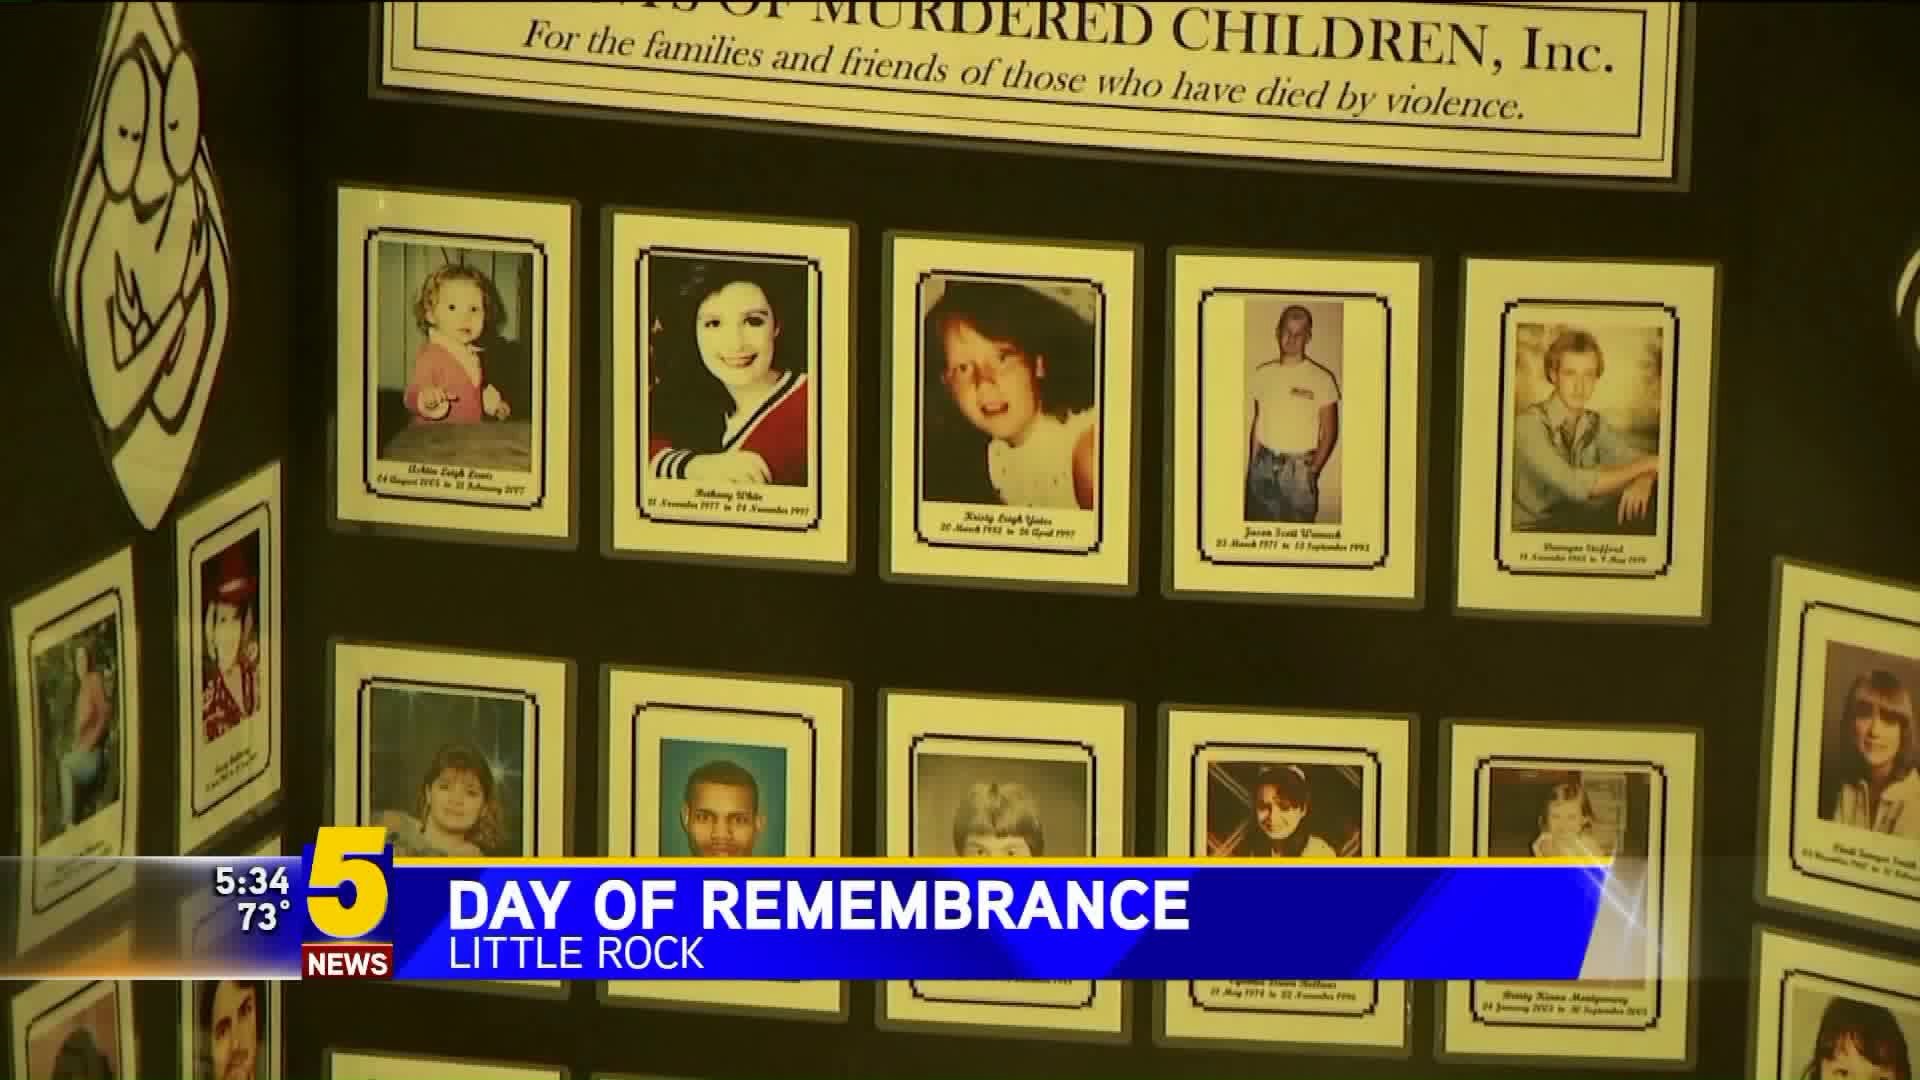 Little Rock Murder Victims Remembered